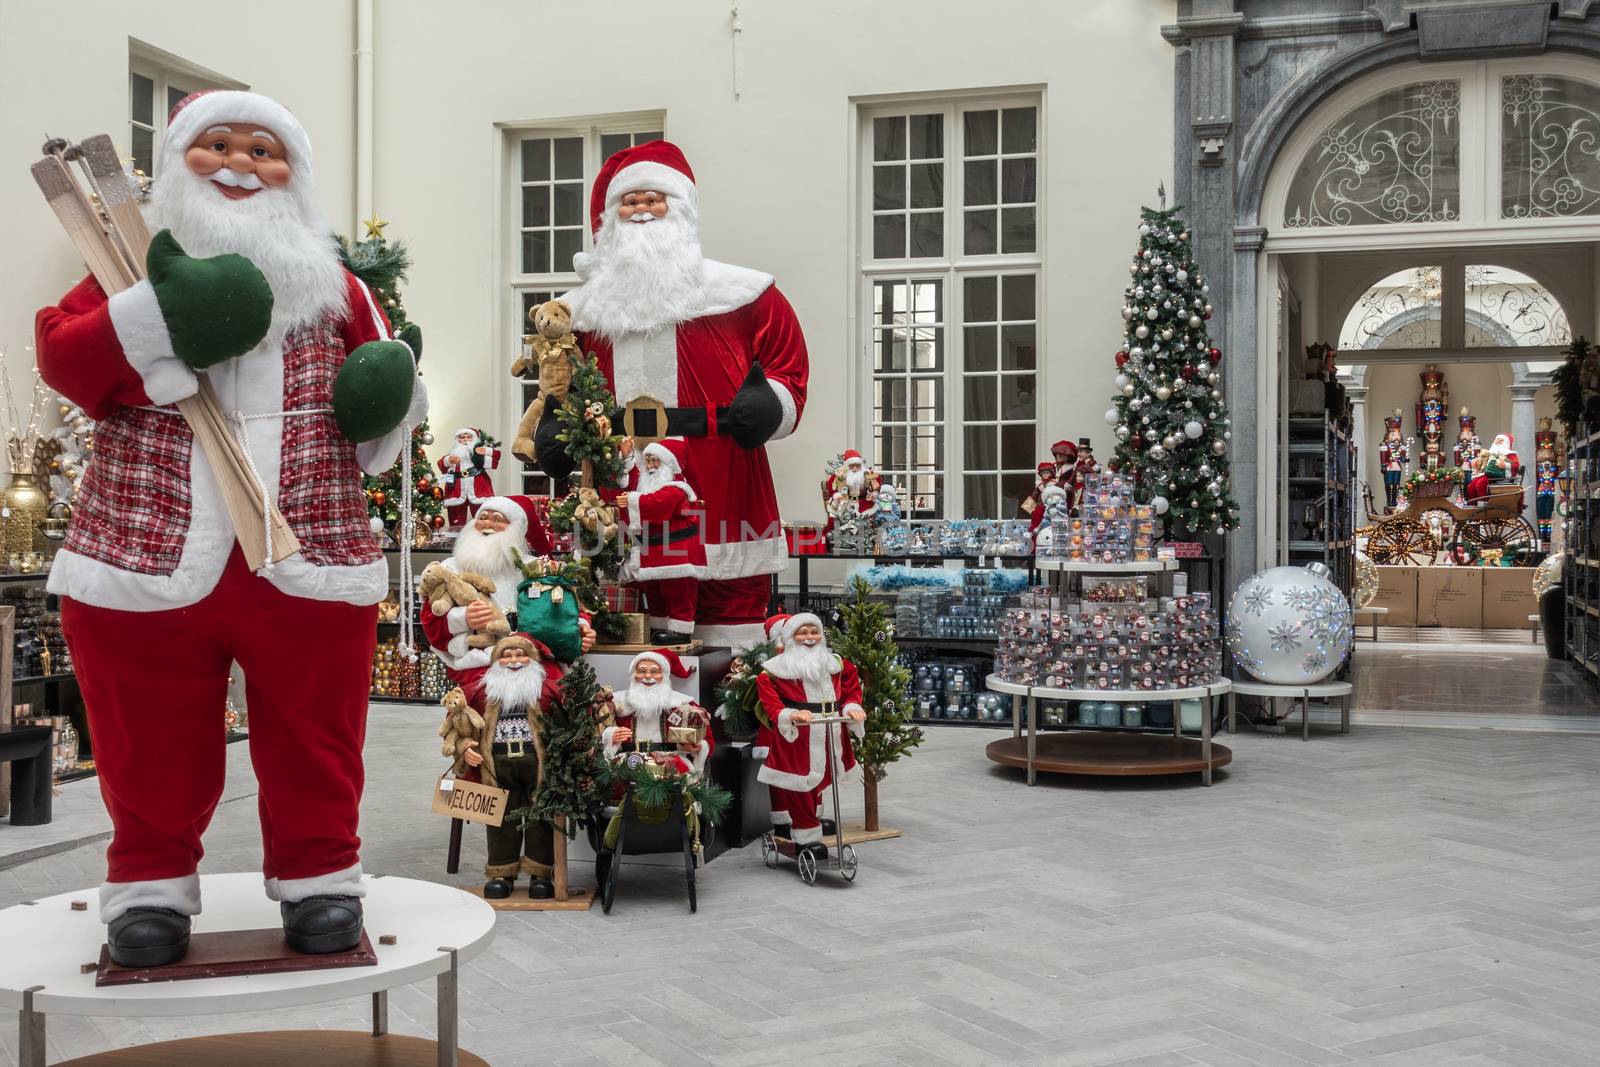 Antwerp, Belgium - September 24, 2018: Two tall Santa Claus mannequins surrounded by more smaller ones and Christmas gifts in store on Meir.